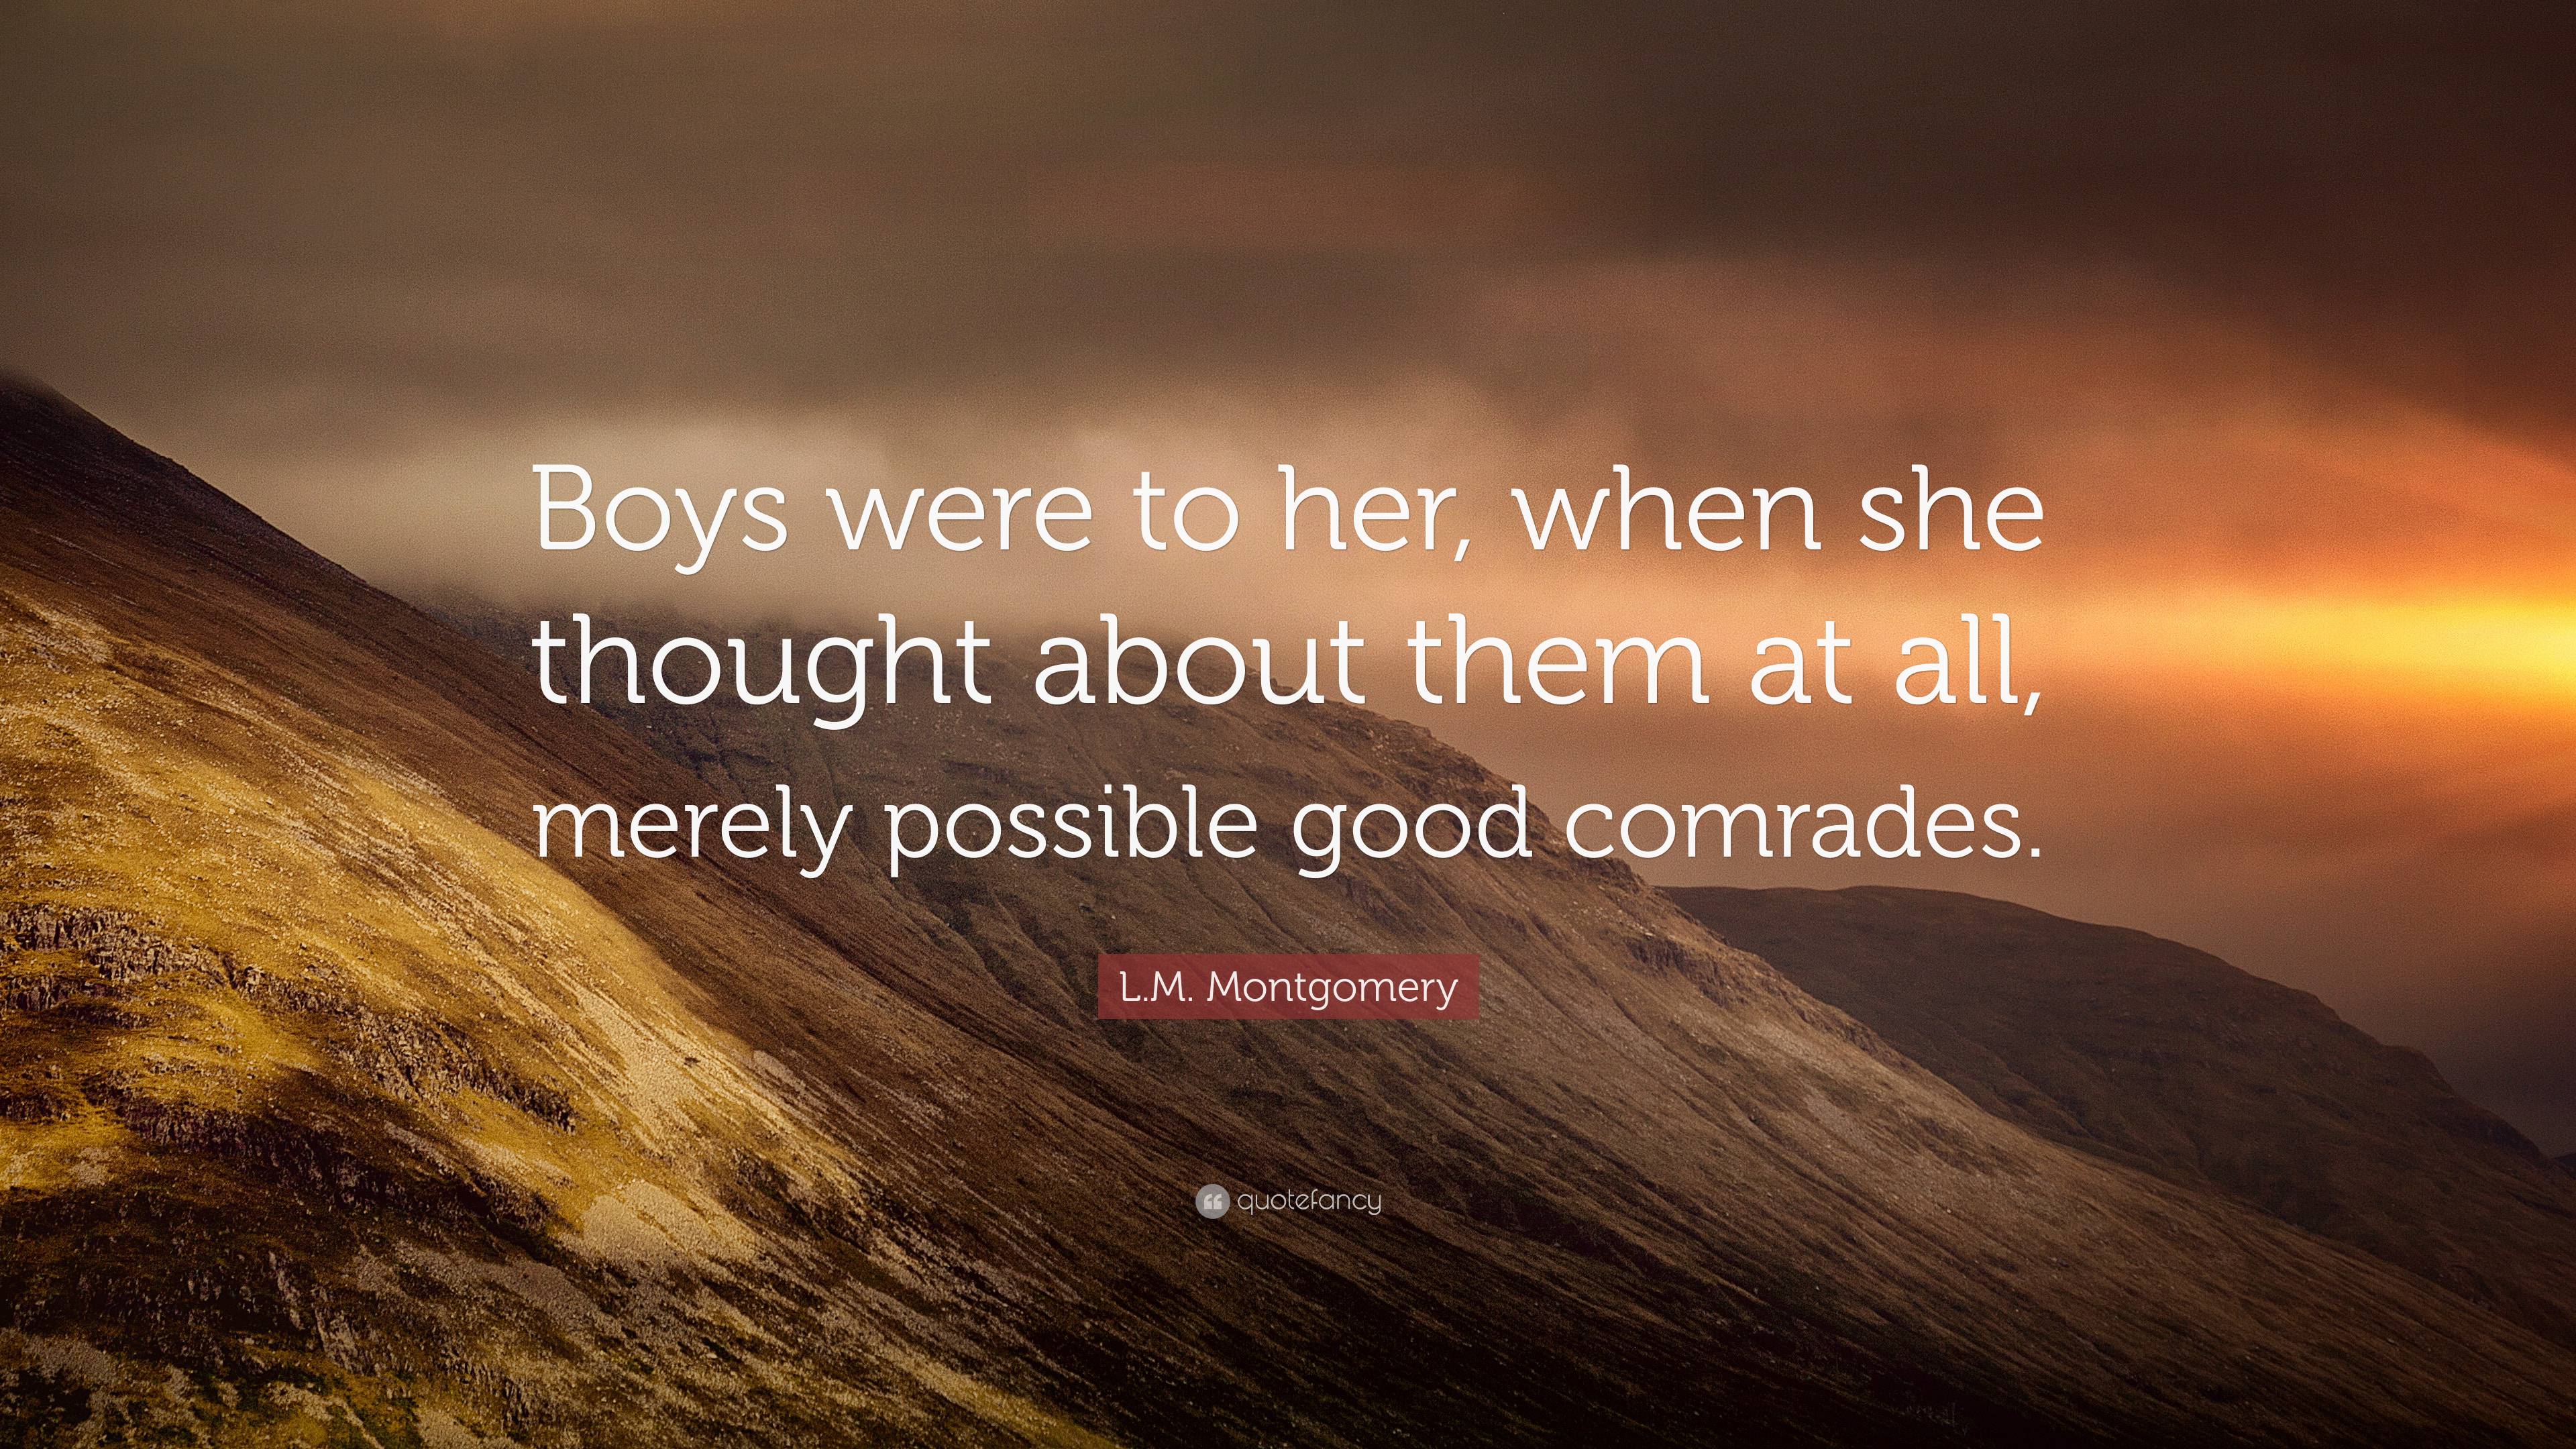 L.M. Montgomery Quote: “Boys were to her, when she thought about them ...